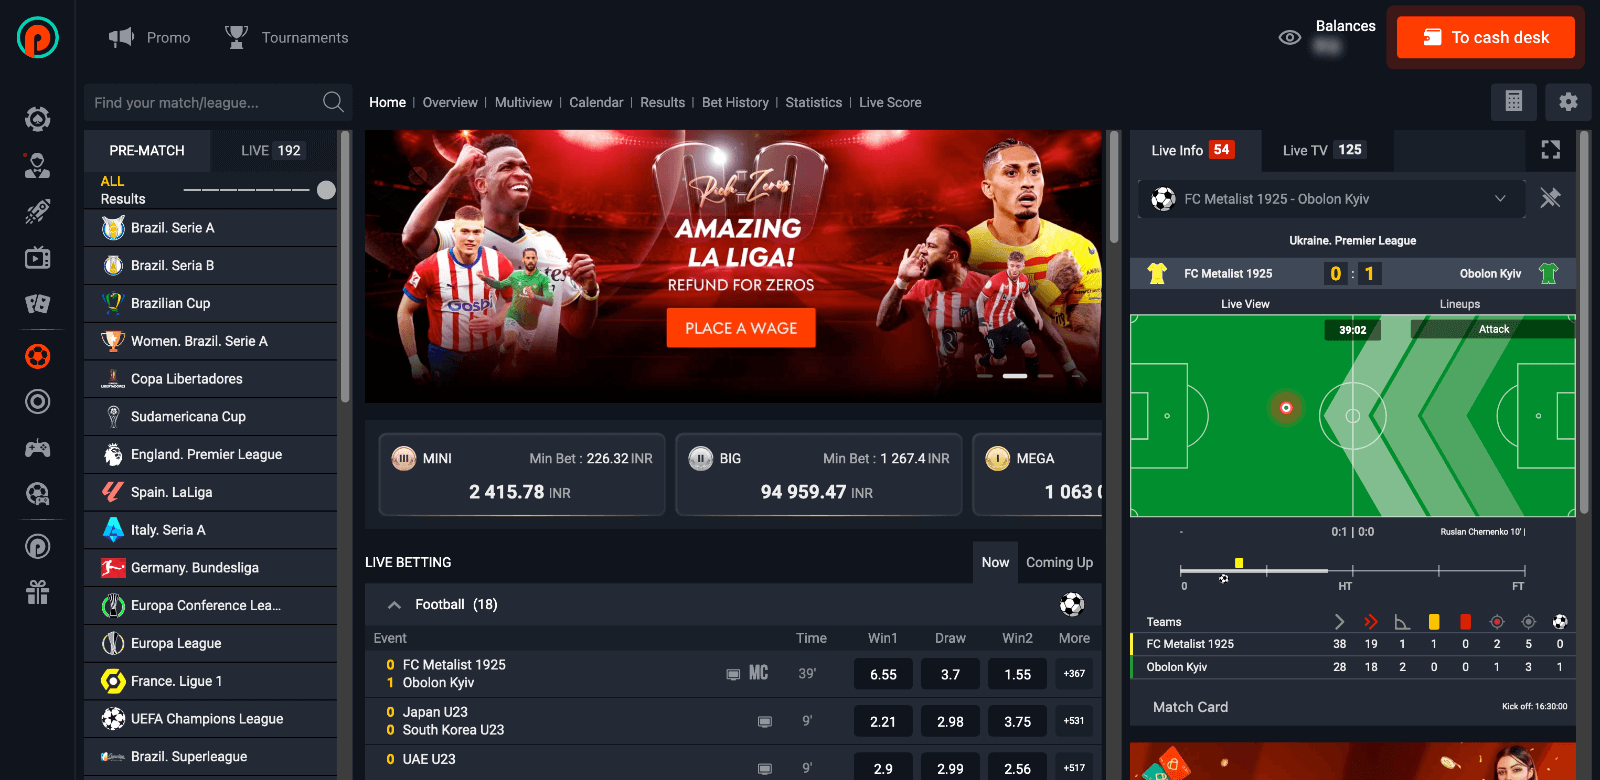 Pin Up offers betting on dozens of sports to Indian users, including local and world championships